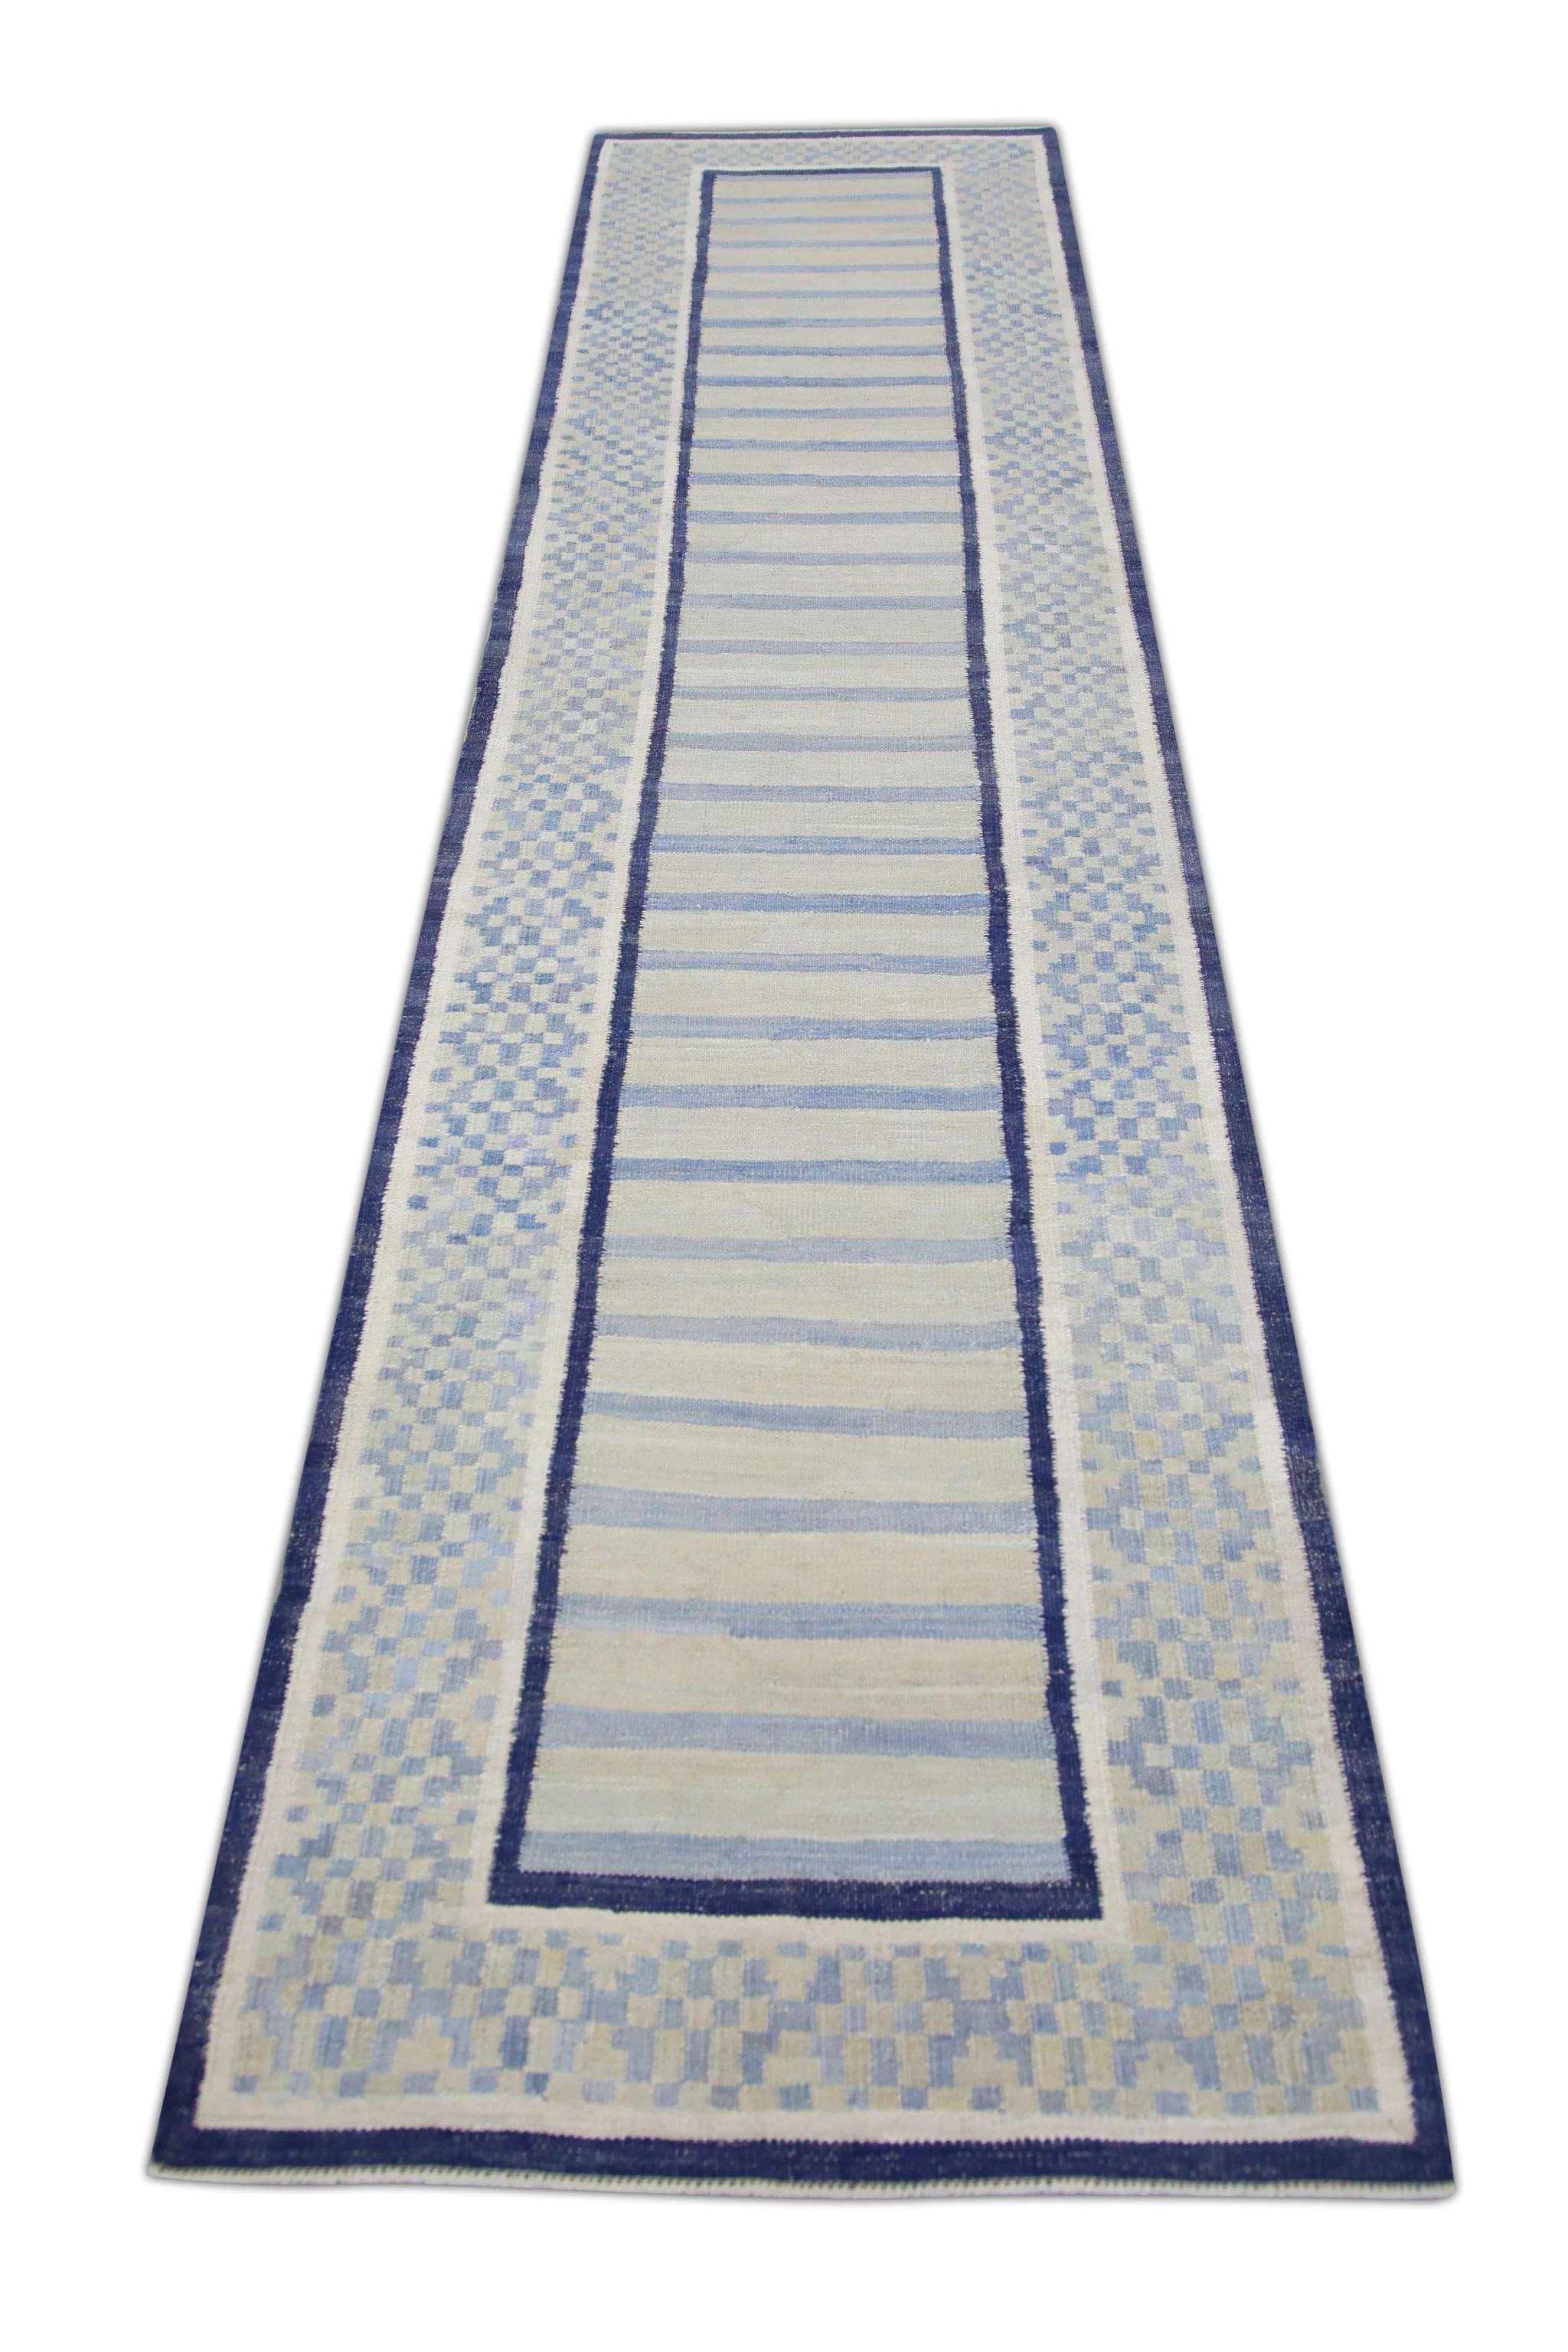 Contemporary Green and Blue Geometric Pattern Flatweave Handmade Wool Runner 3' X 12' For Sale